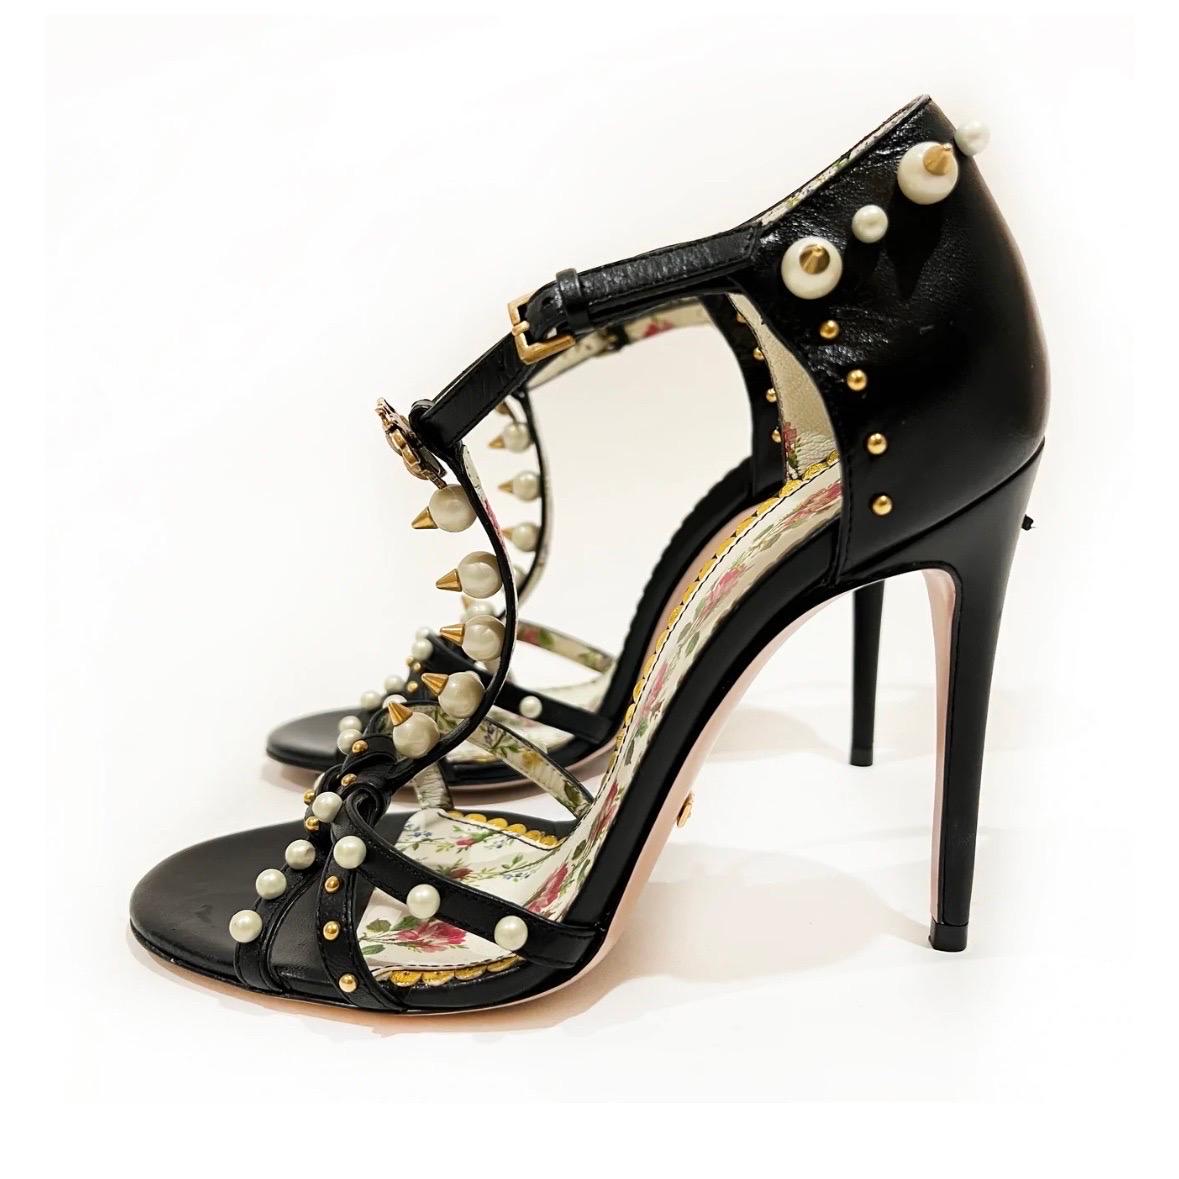 Pearl stud sandal heels by Gucci  
Made in Italy 
Black leather straps
Pearl and gold metal stud embellishments
Gucci Bee charm at ankle 
Stiletto heel  
Floral insole 
Good condition, wear on outsoles and some scratches on heels (see photo)